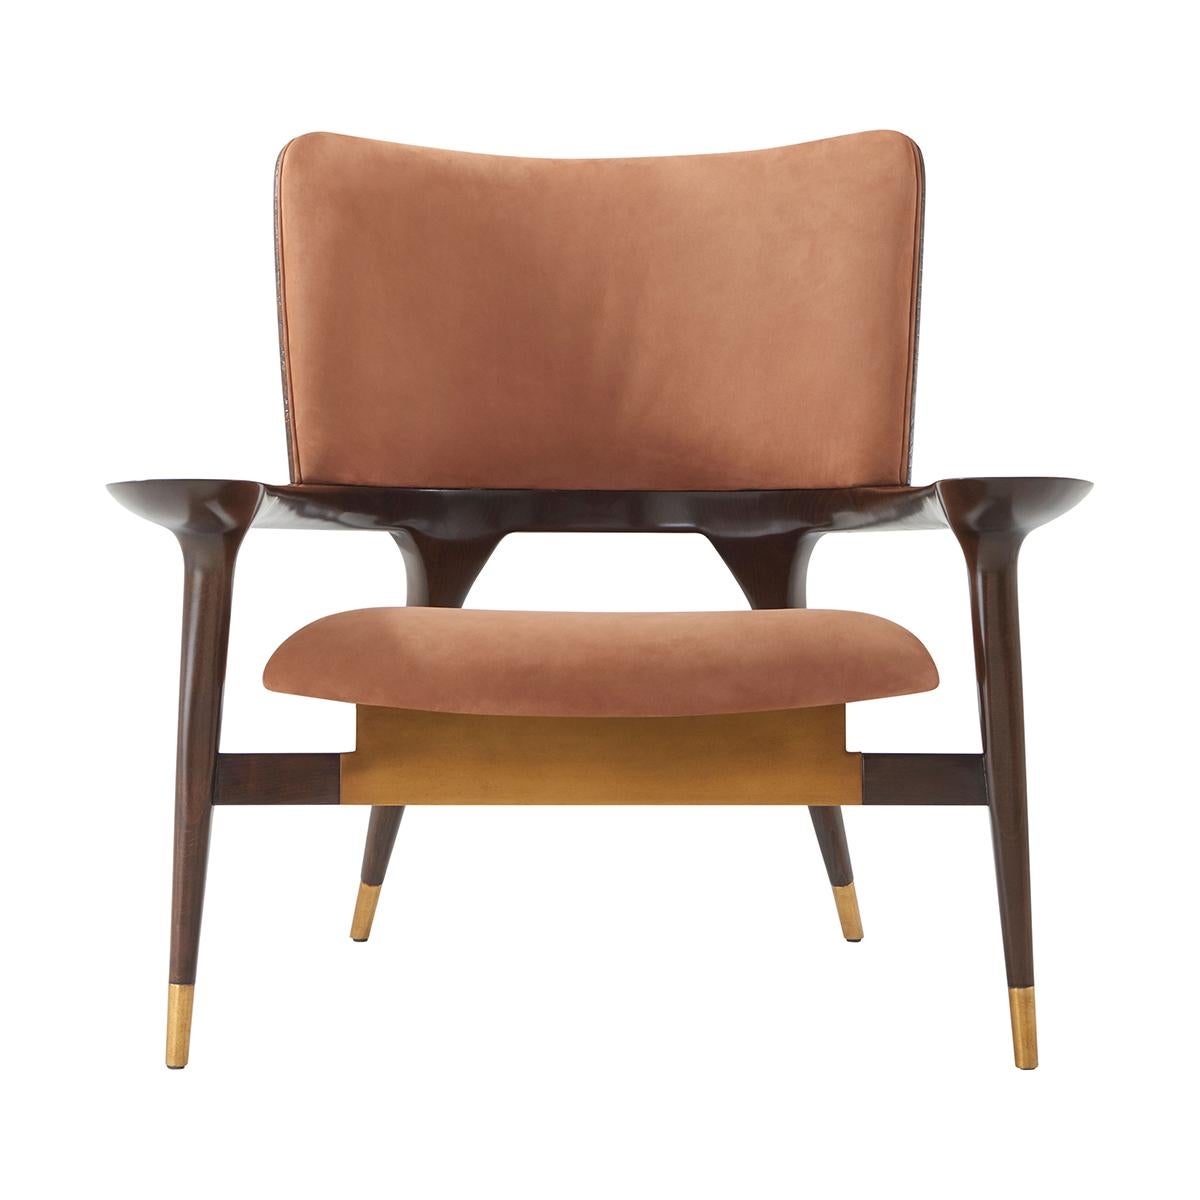 With shapely legs that taper beneath the elegant frame and a floating seat. Gracefully curving into sculptural arms, a delicate balance is formed between distinguished metal accents and exquisite veneer.

Dimensions: 37.5